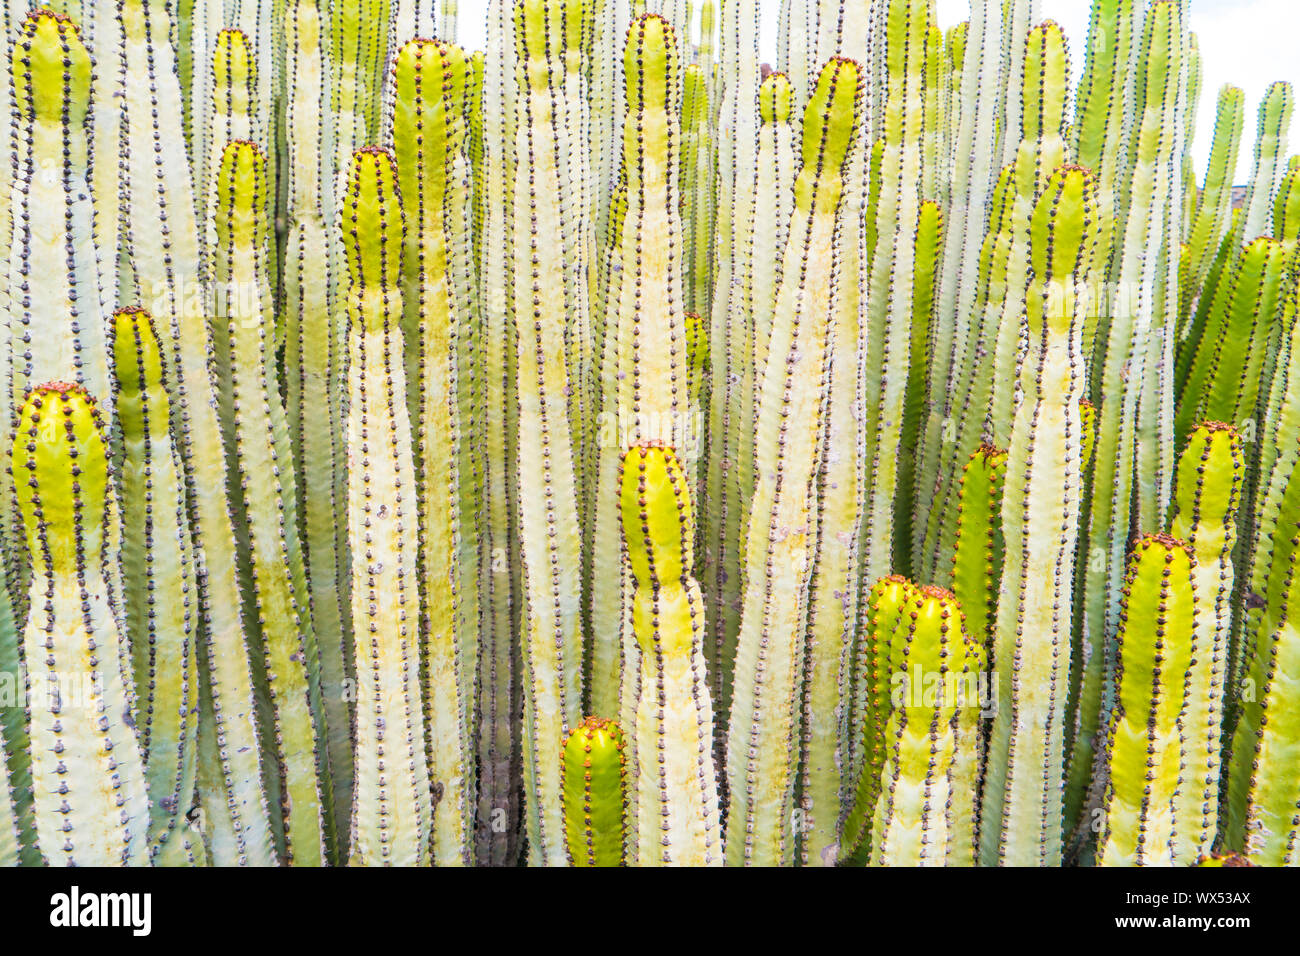 Close-up view of many trunks of spurge cactus Stock Photo